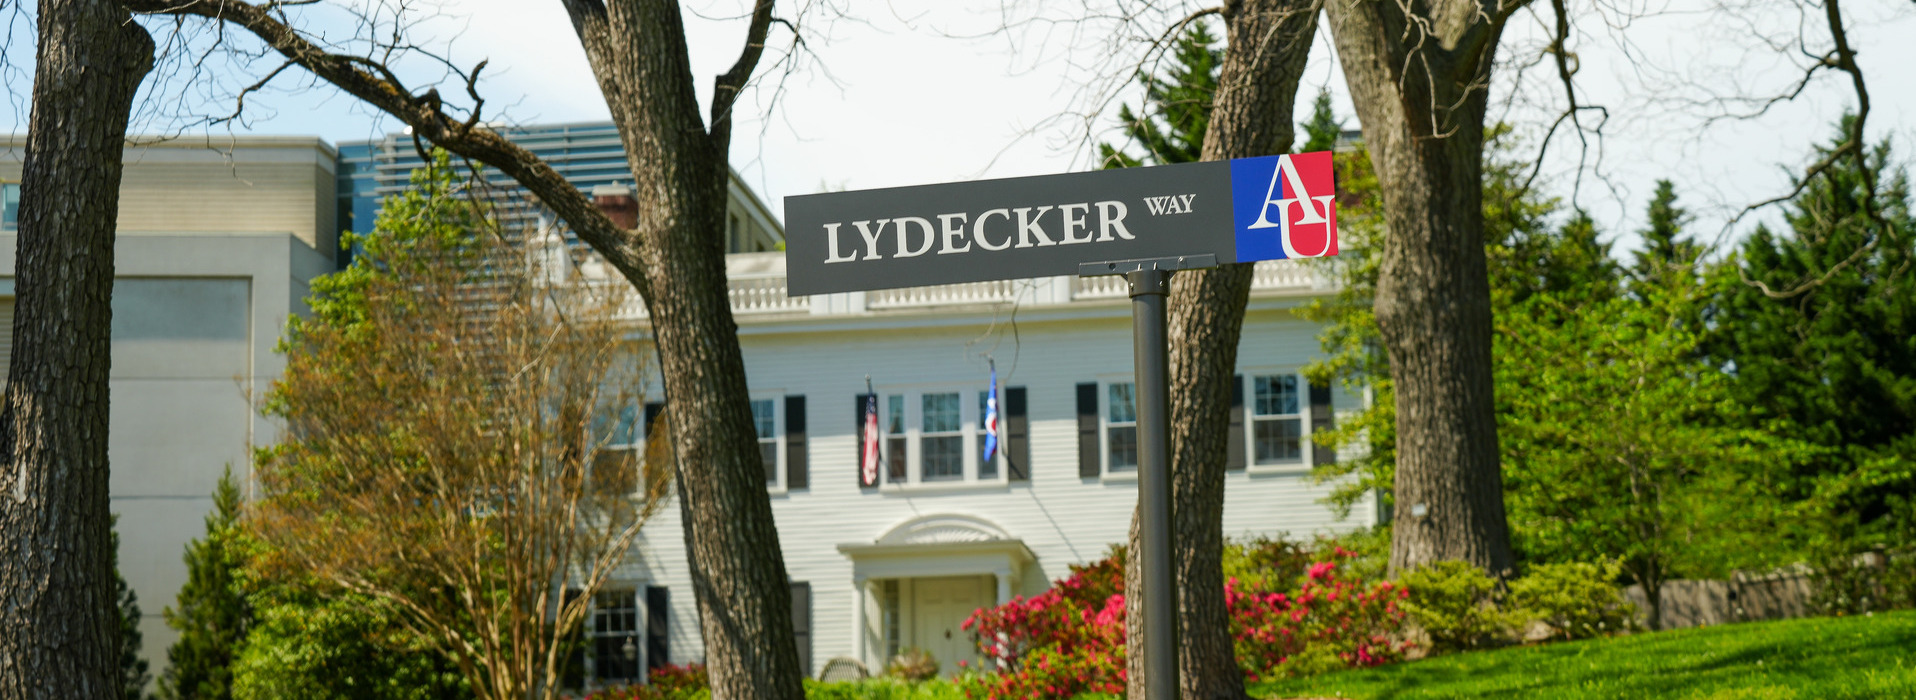 The signage for "Lydecker Way" in front of the President's House on AU's campus.